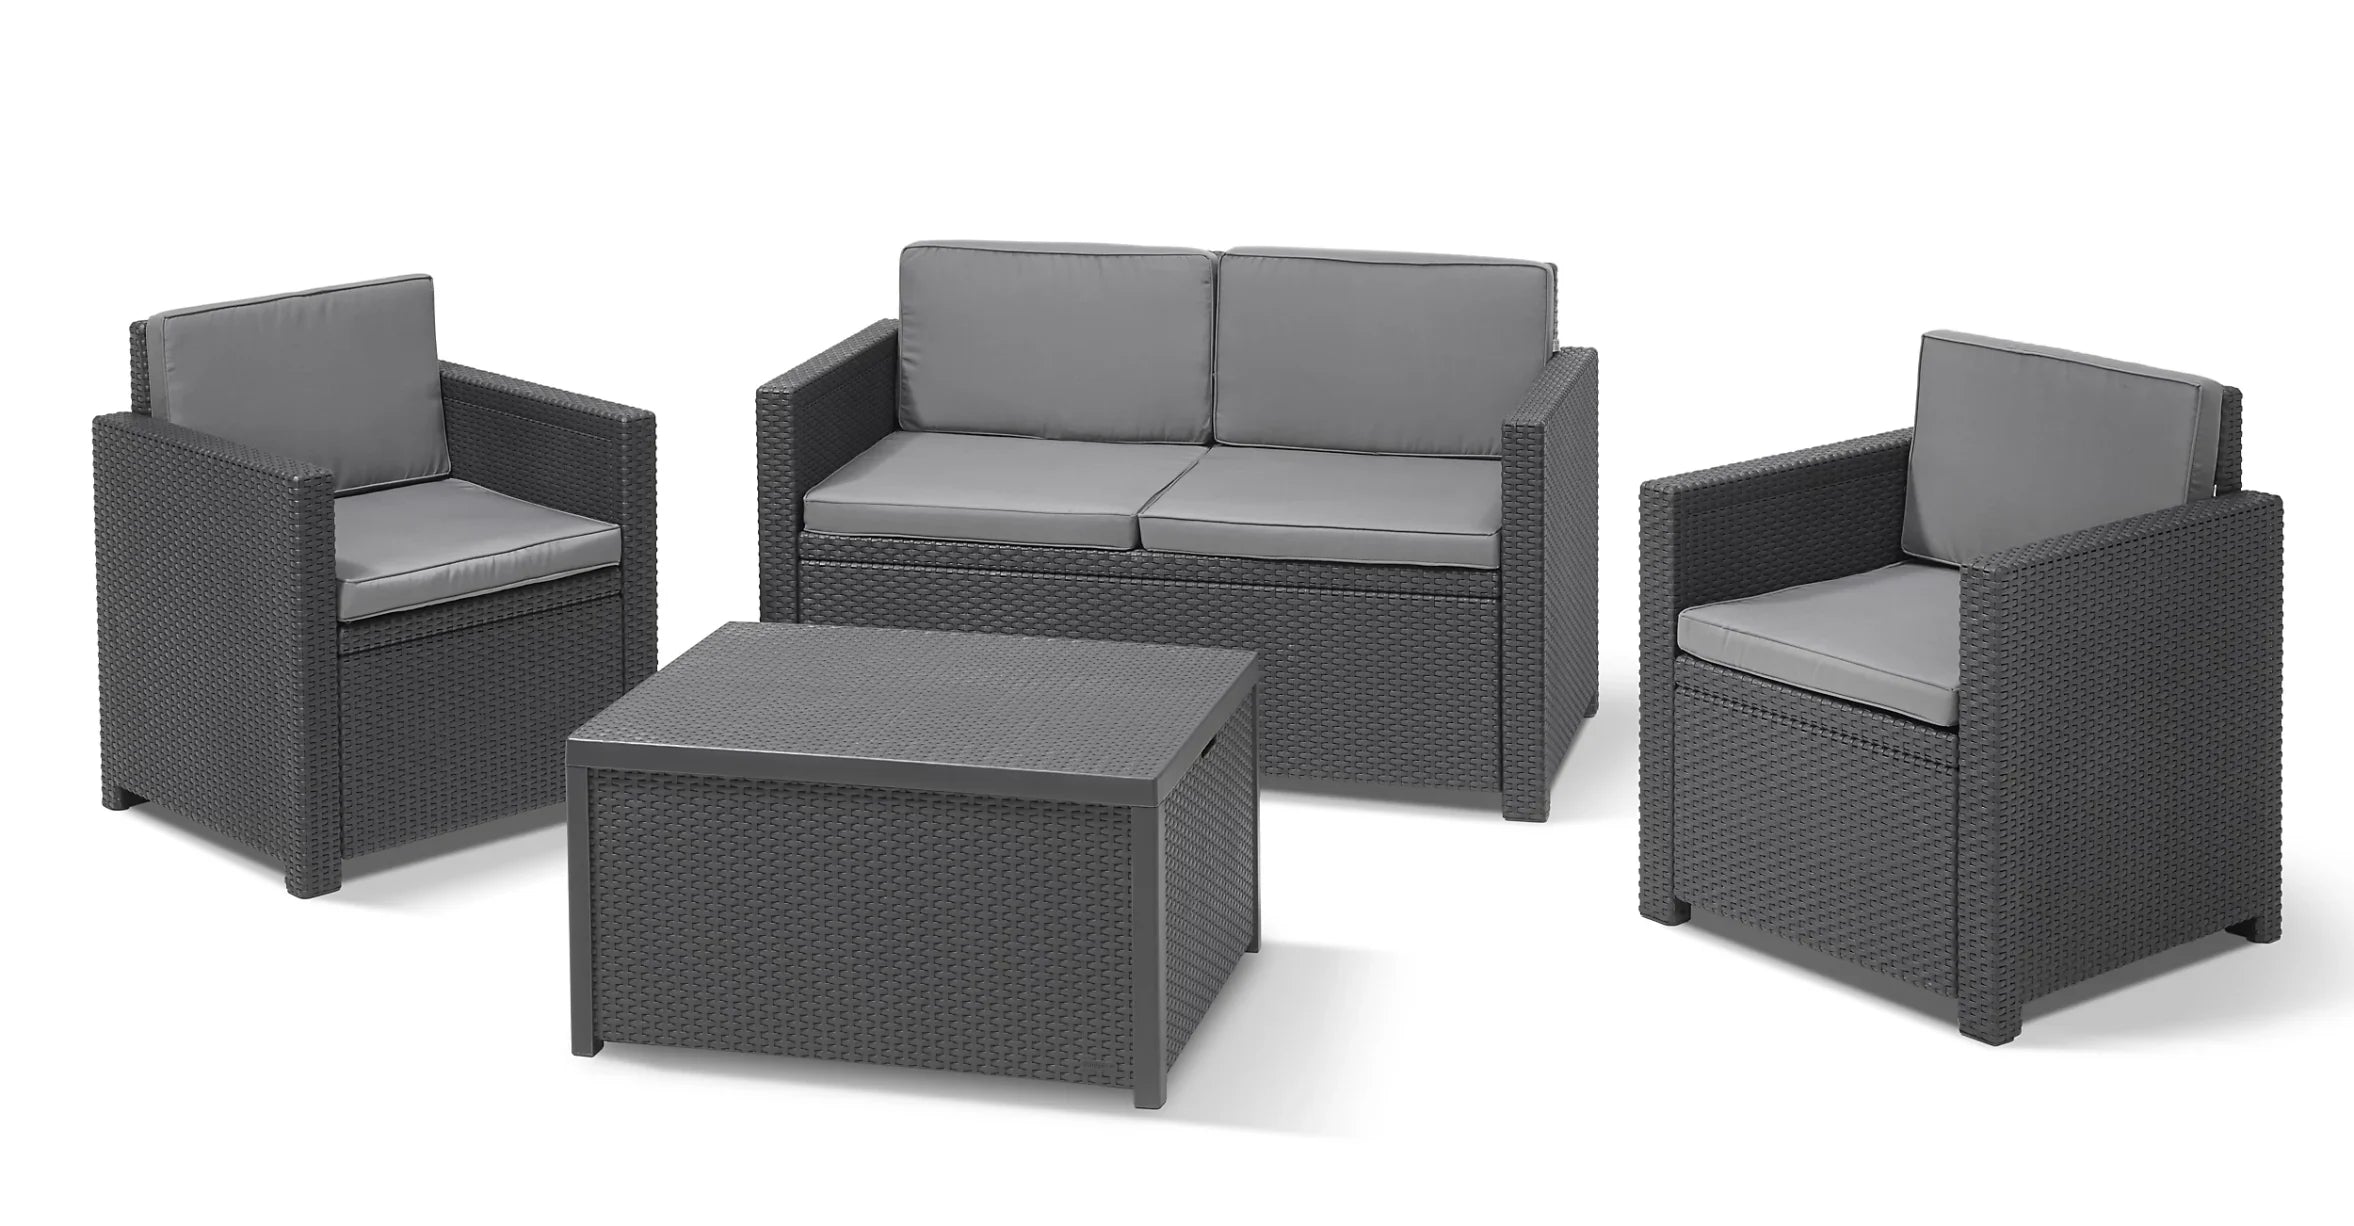 Keter Monaco Lounge 4 seater Plastic Coffee set With Storage Table - Garden Furniture 8489